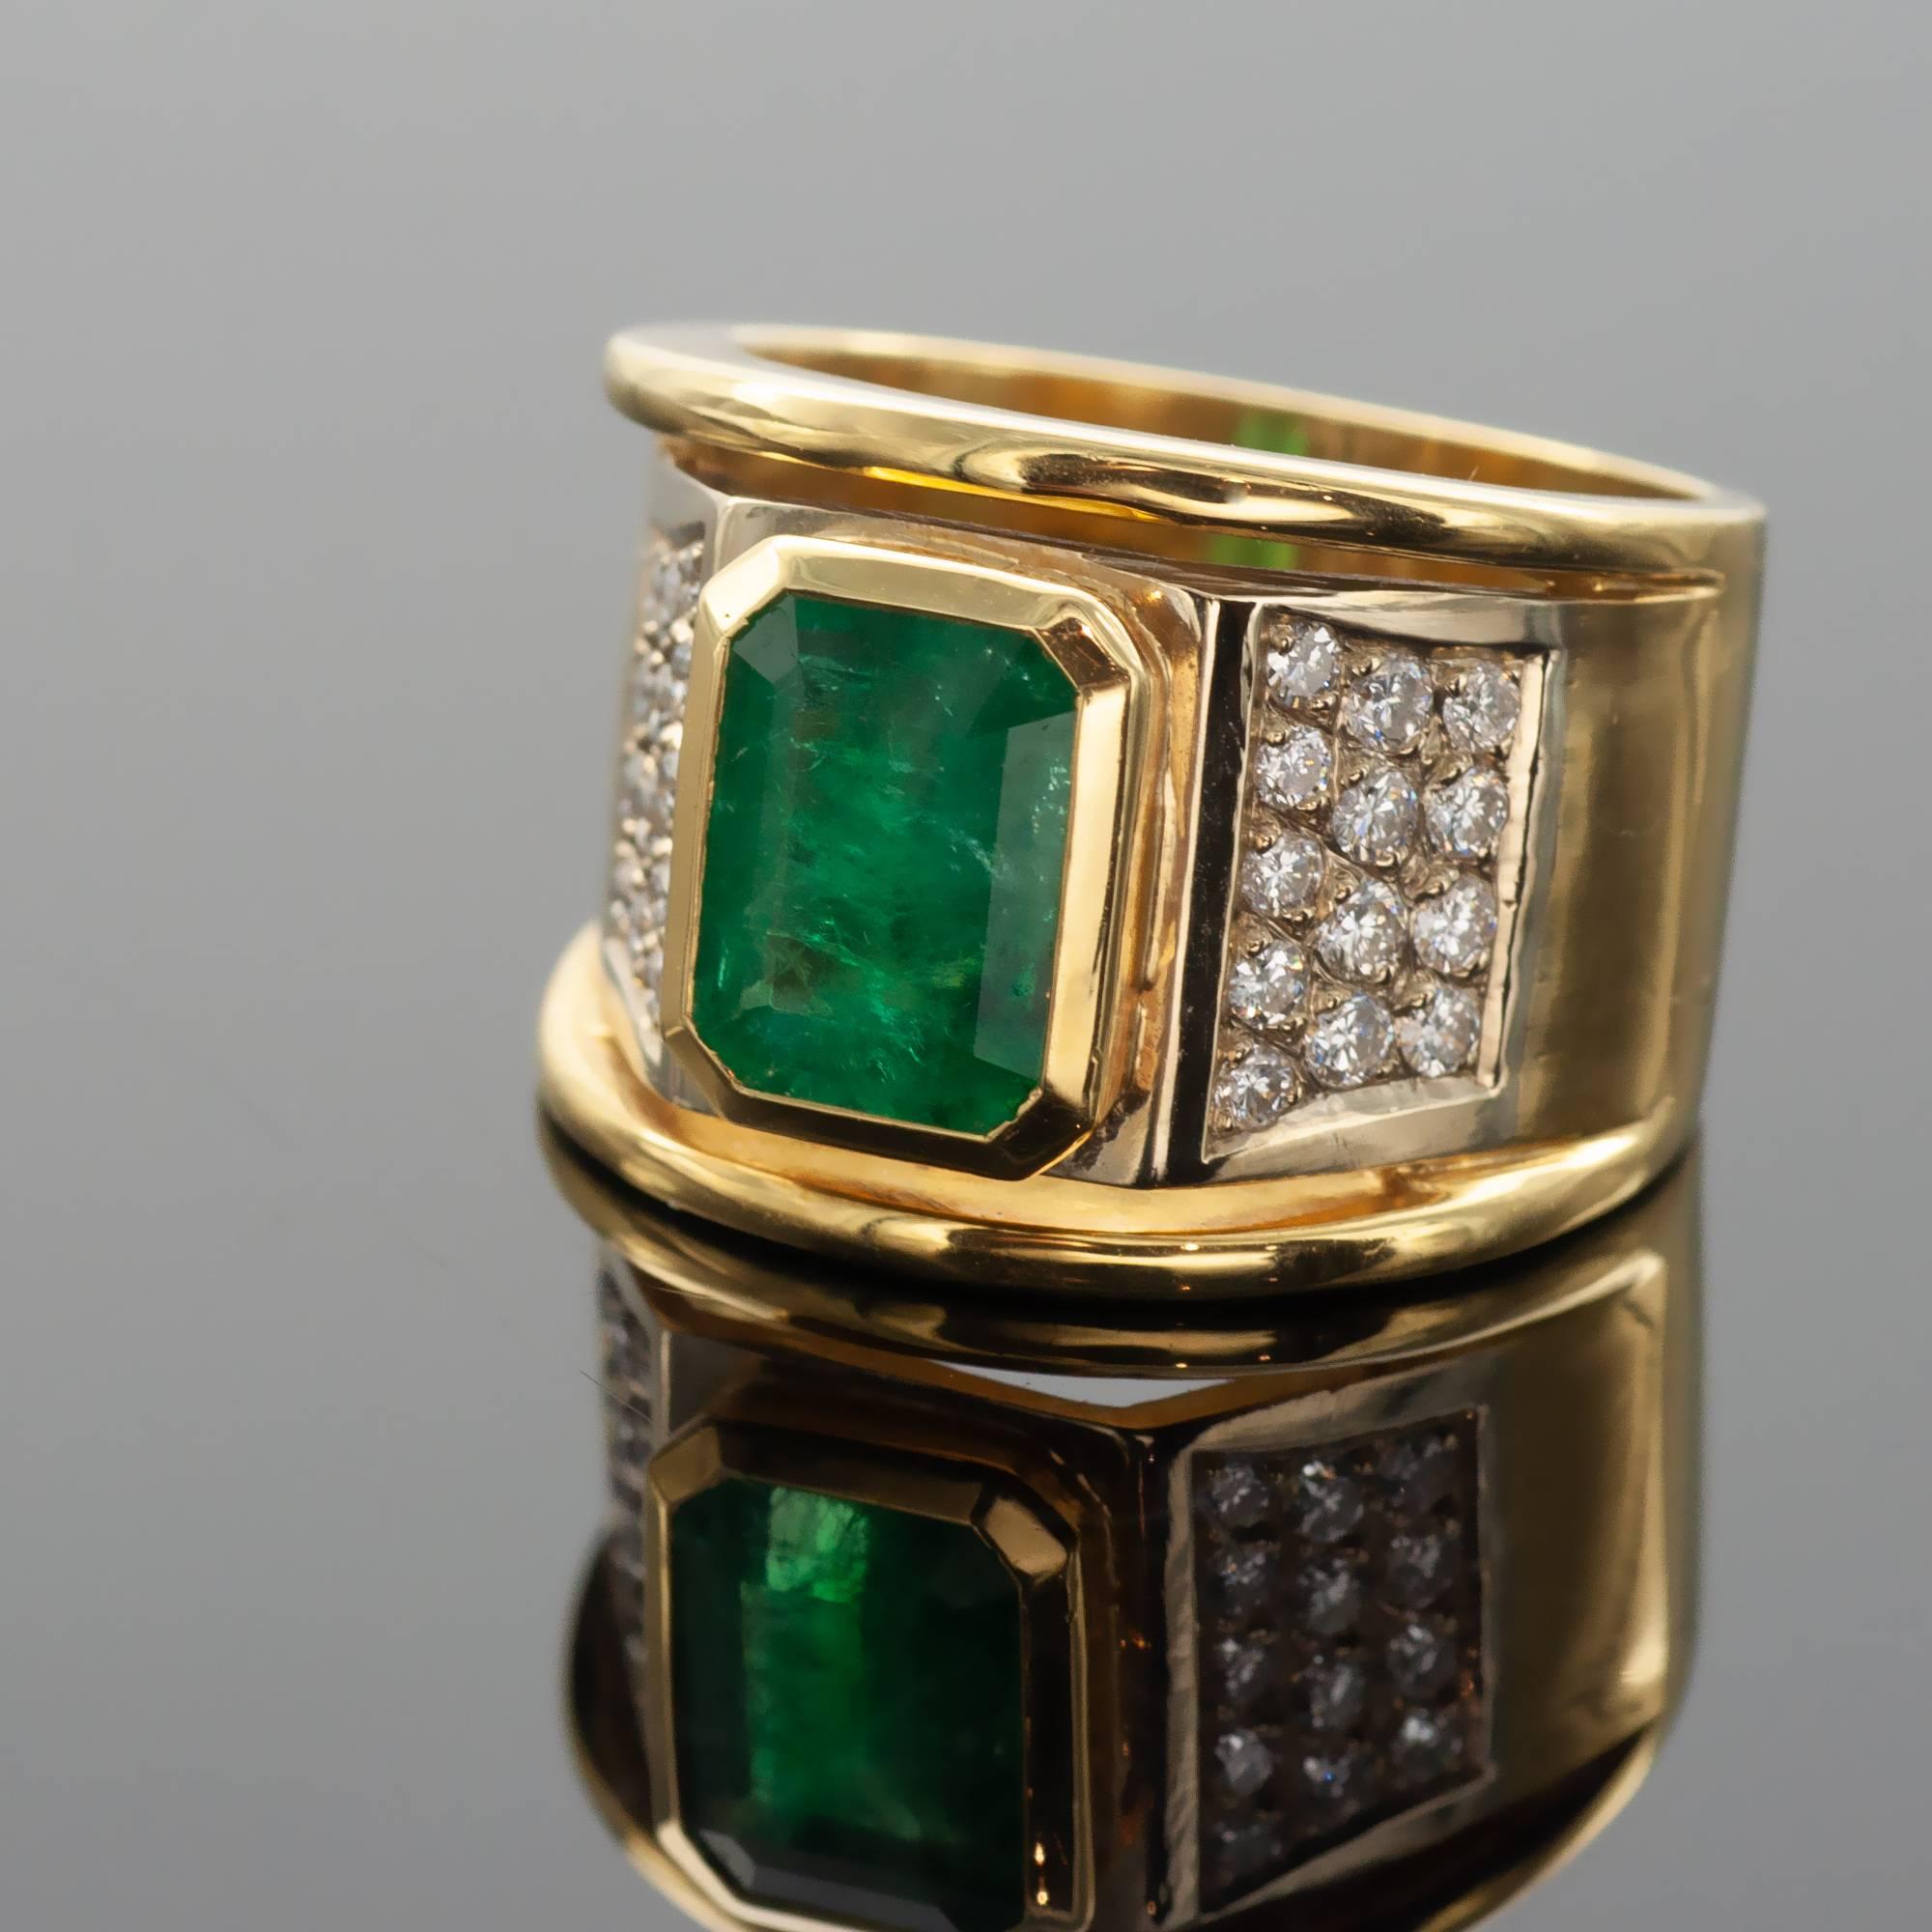 Stylish emerald cocktail ring. The ring itself is a wide 18kt yellow gold band in the center of which a 2.24 carat emerald is bezel set . 26 round diamonds ( ±0.52 carat) set on white gold on both sides of the emerald enlighten the whole ring.